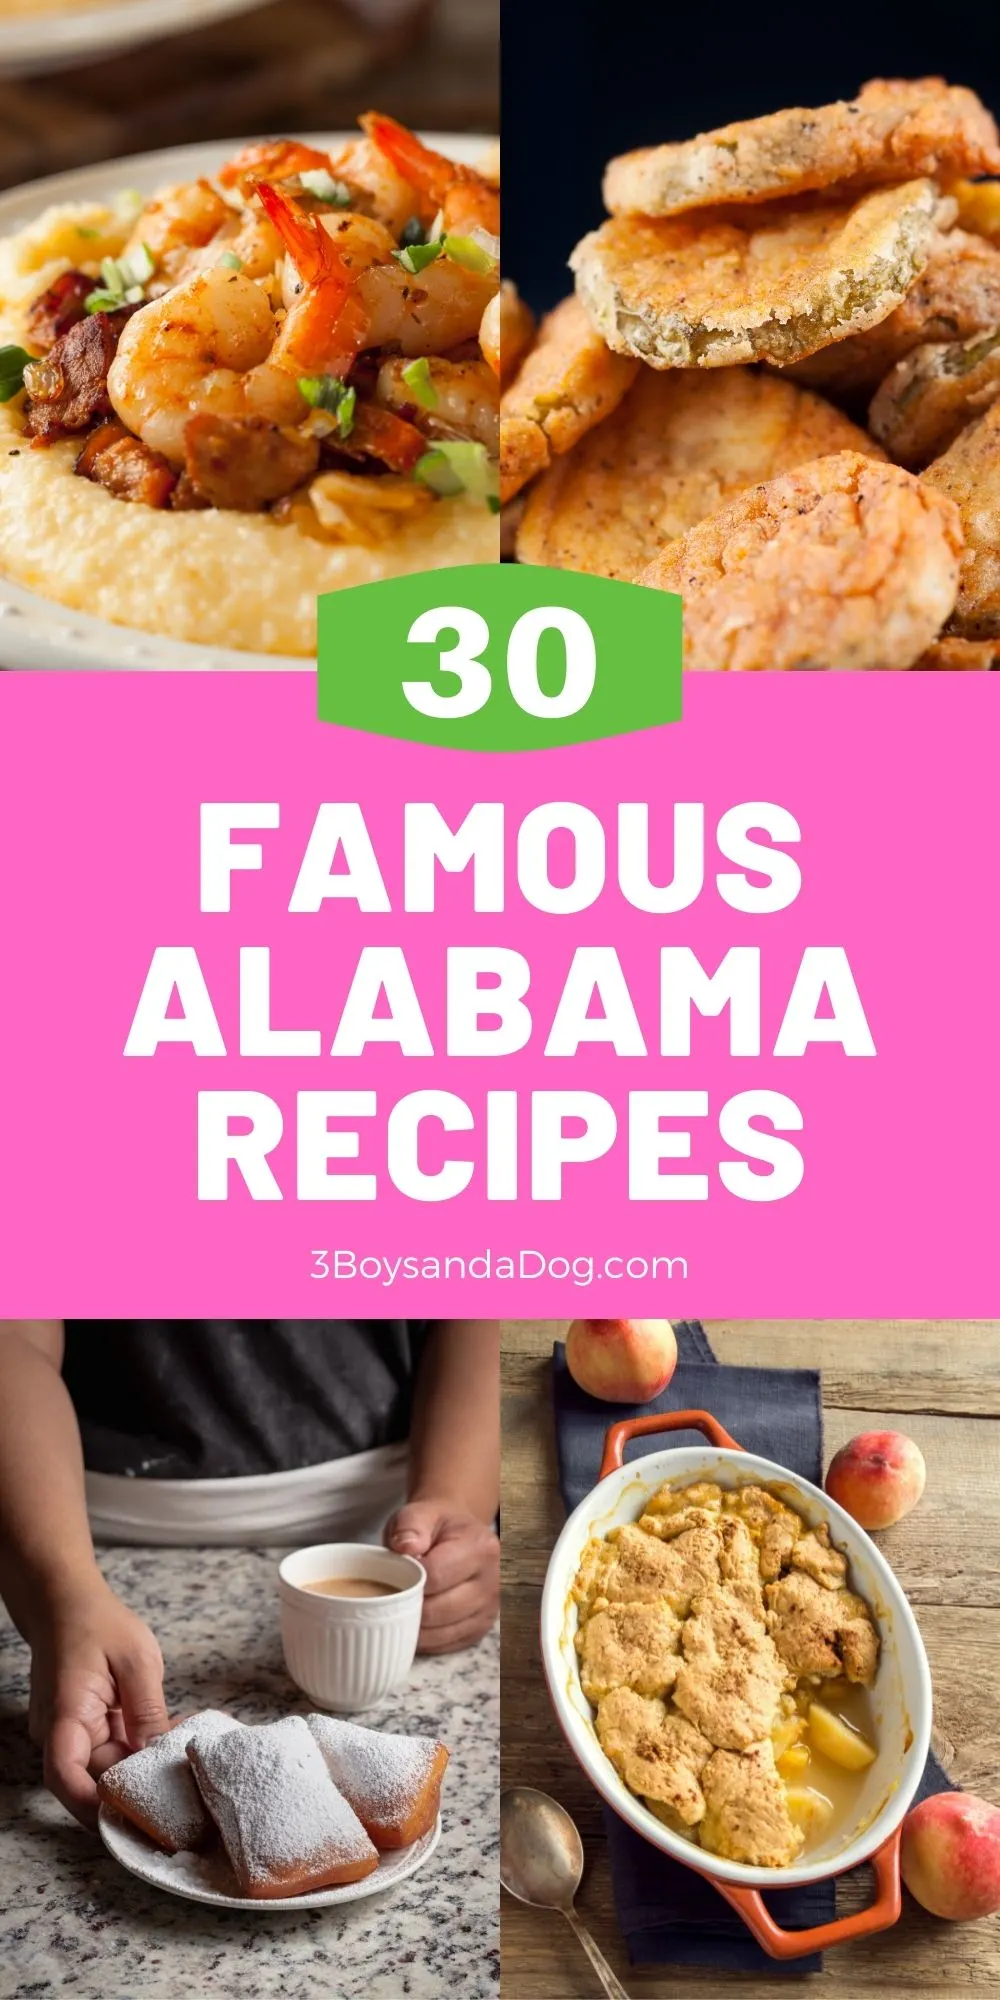 Pin image with 4 famous Alabama foods